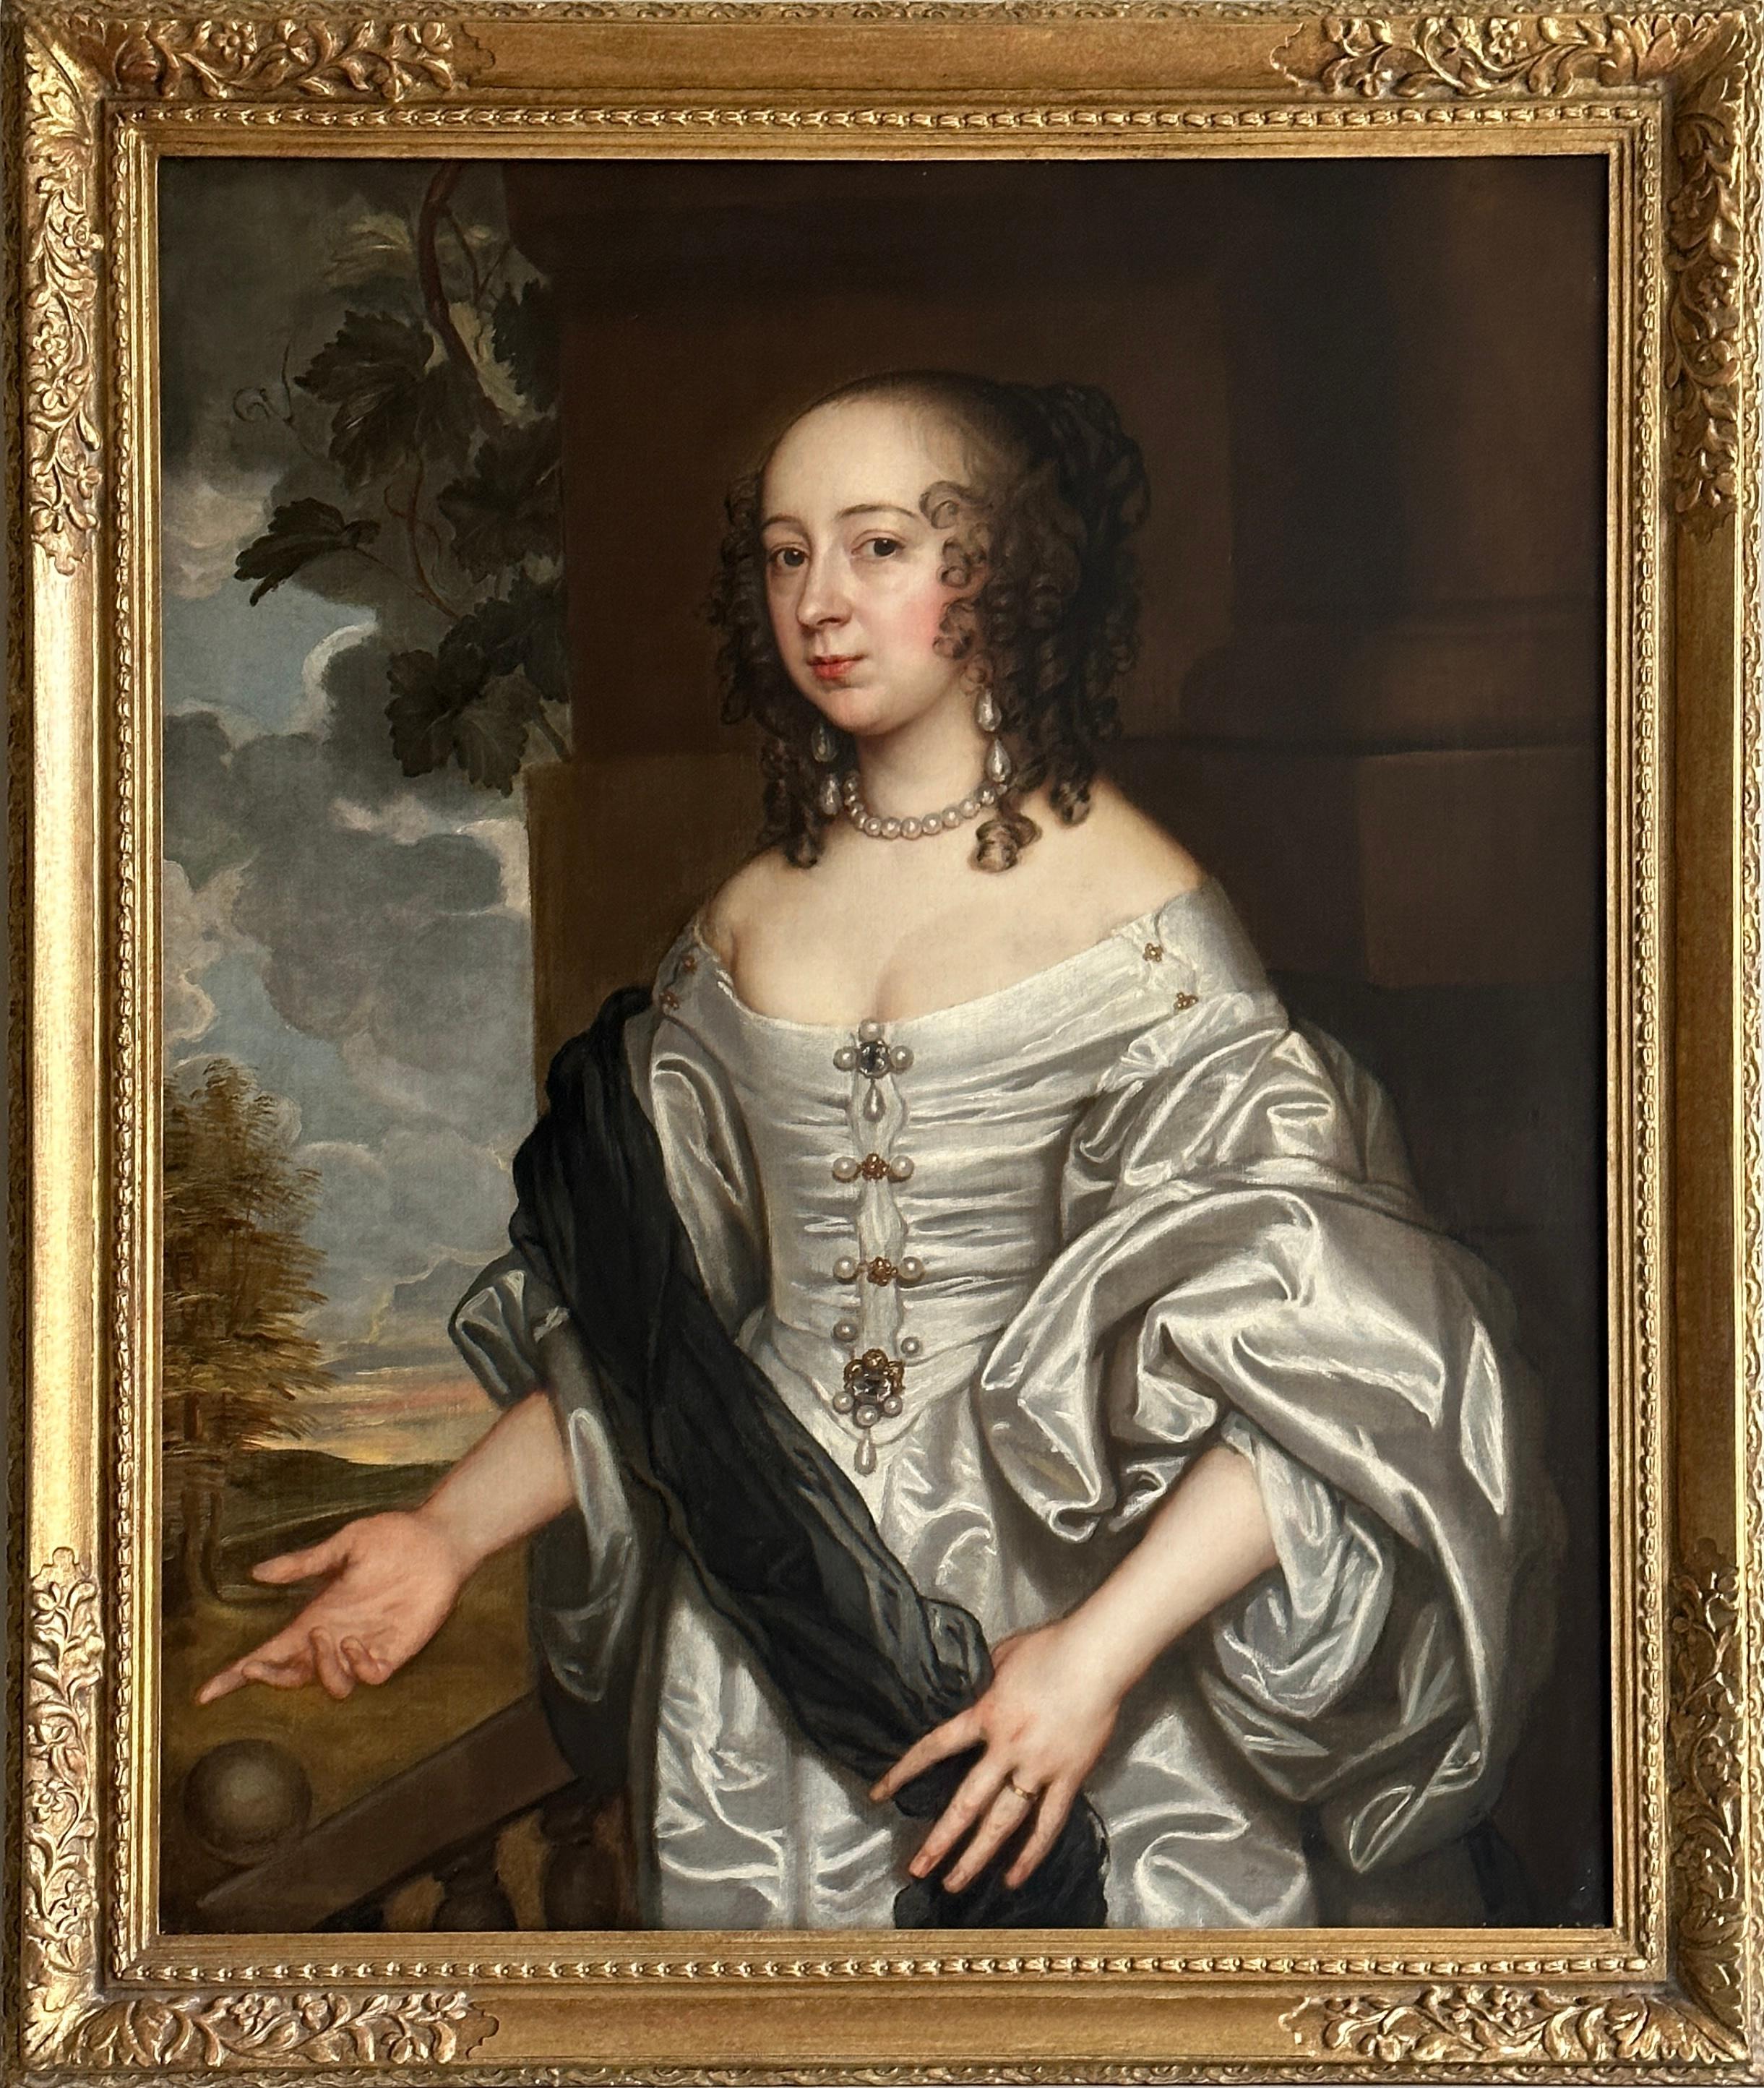 John Greenhill Portrait Painting - English 17th century portrait of a lady in an ivory silk gown on a terrace